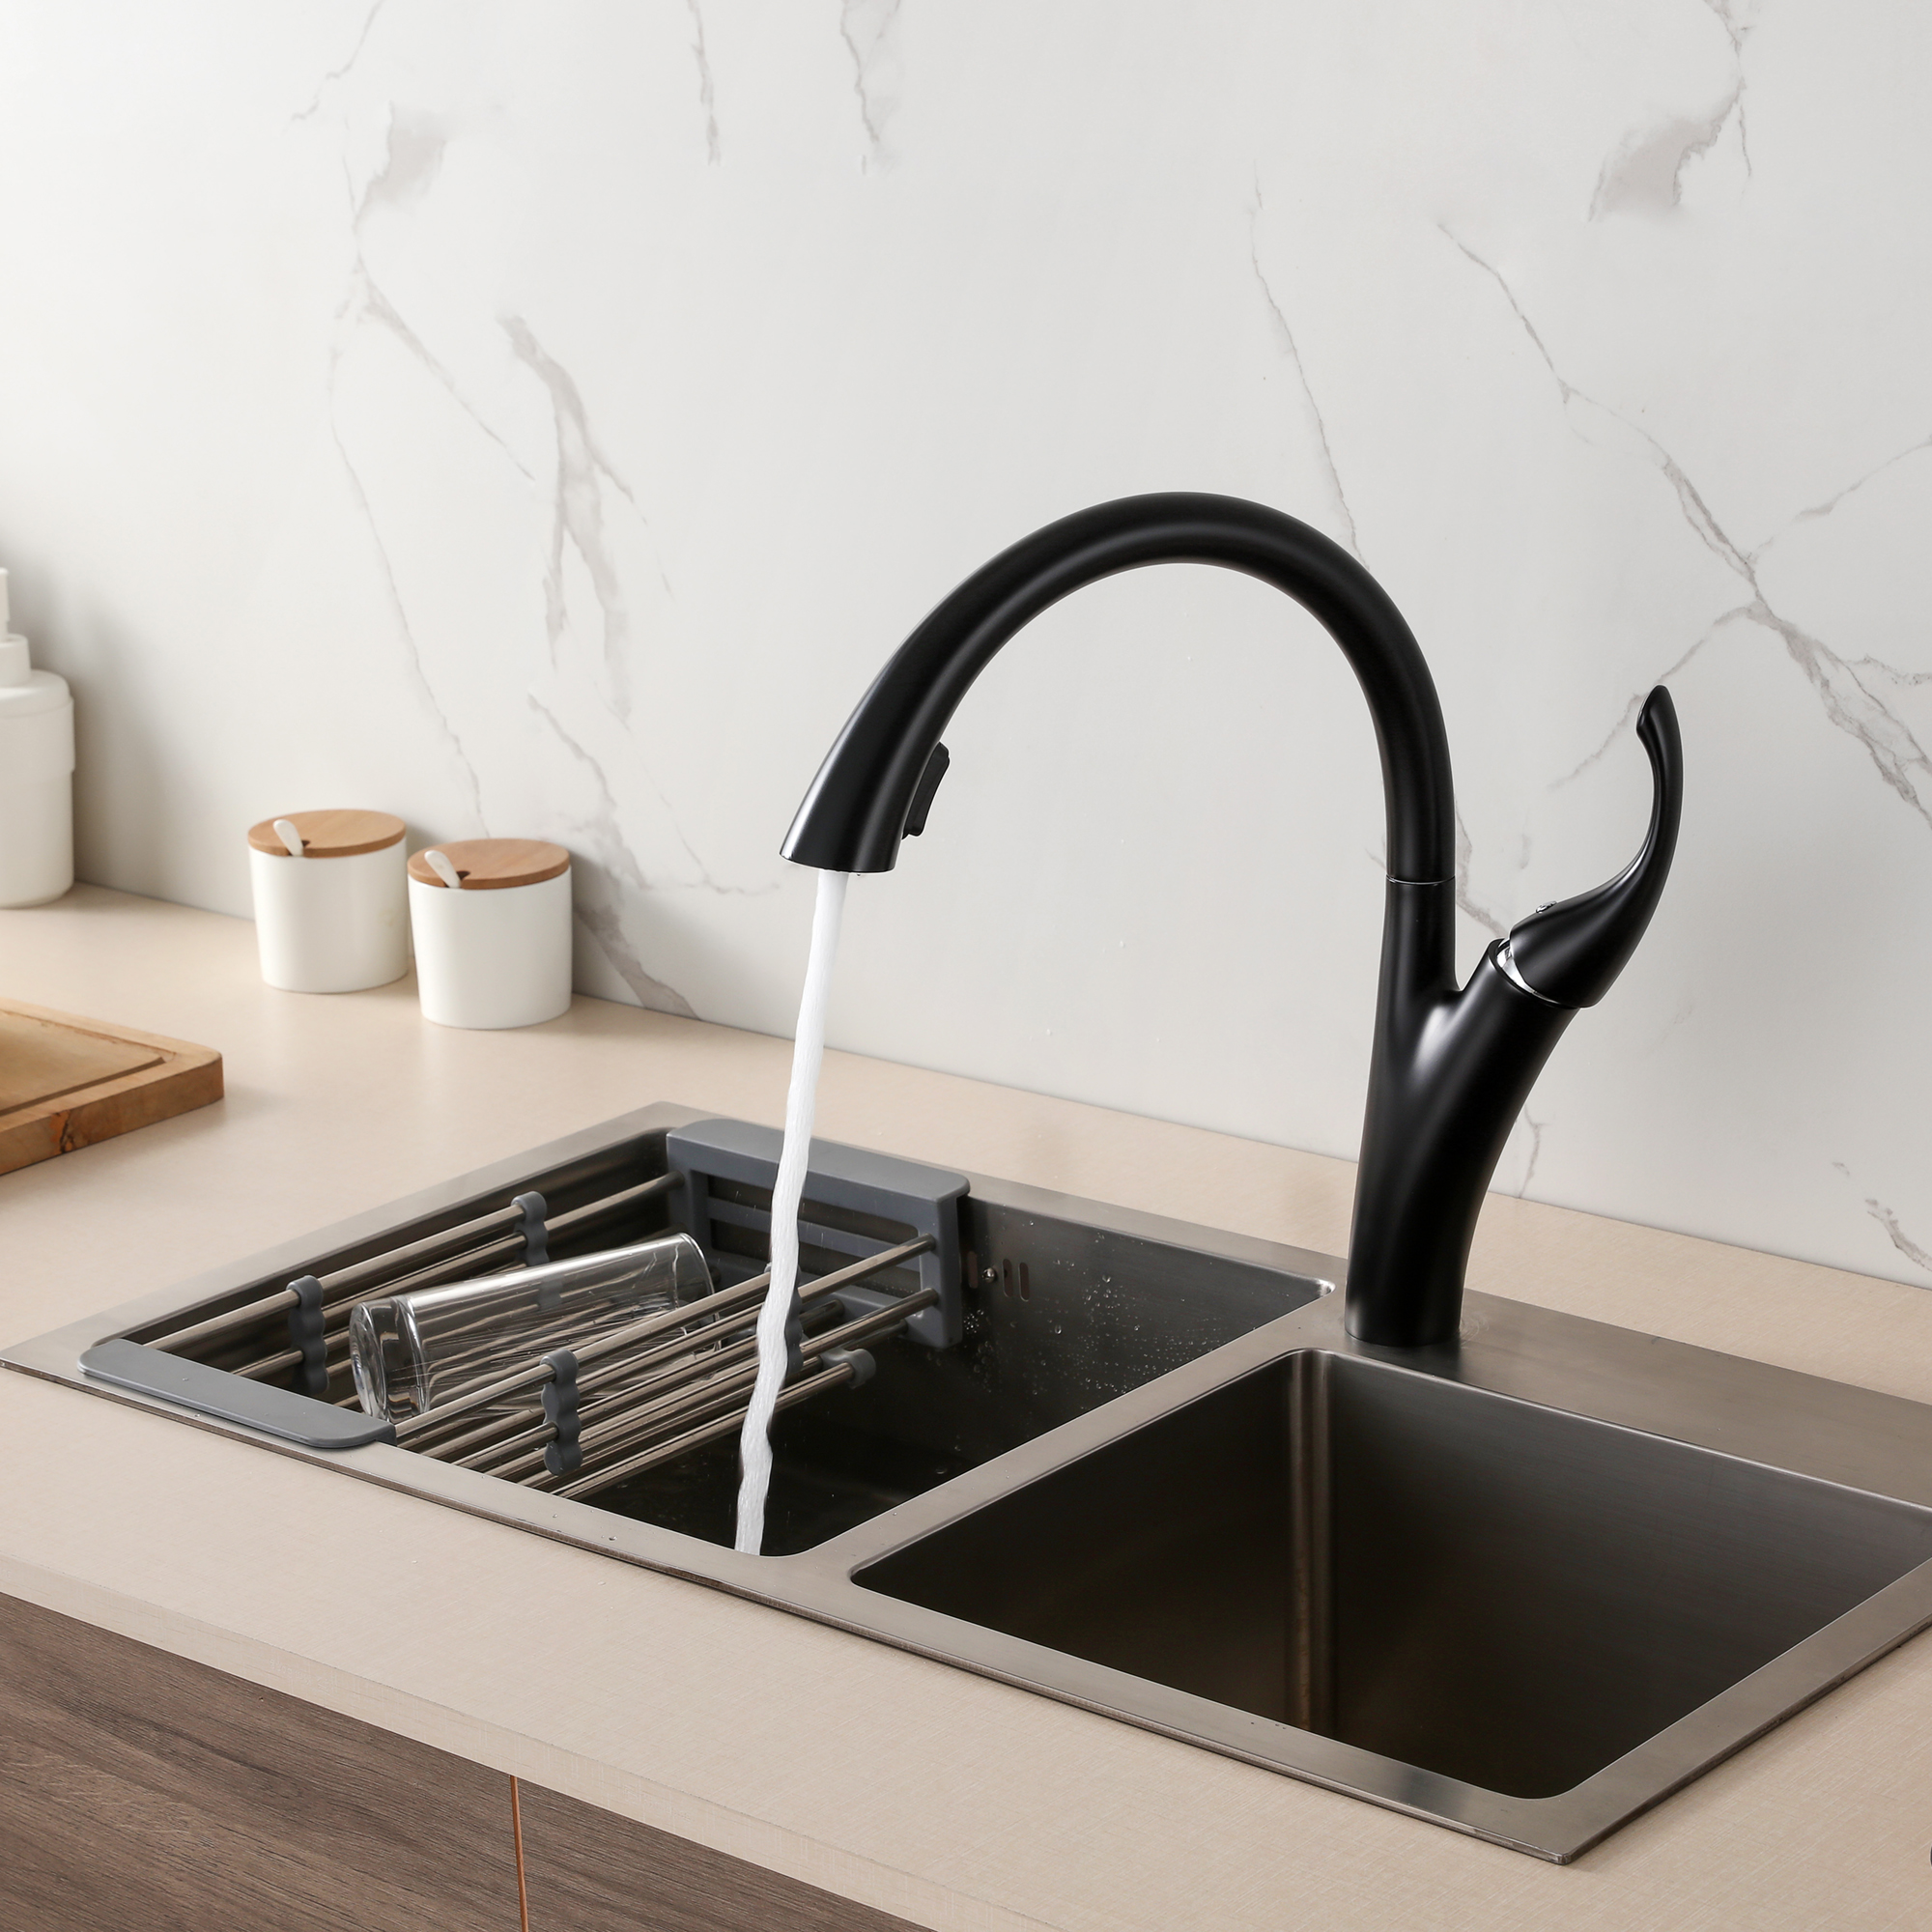 Gowo Heavy Sink New Tap Faucet Kitchen Mixer With Great Price